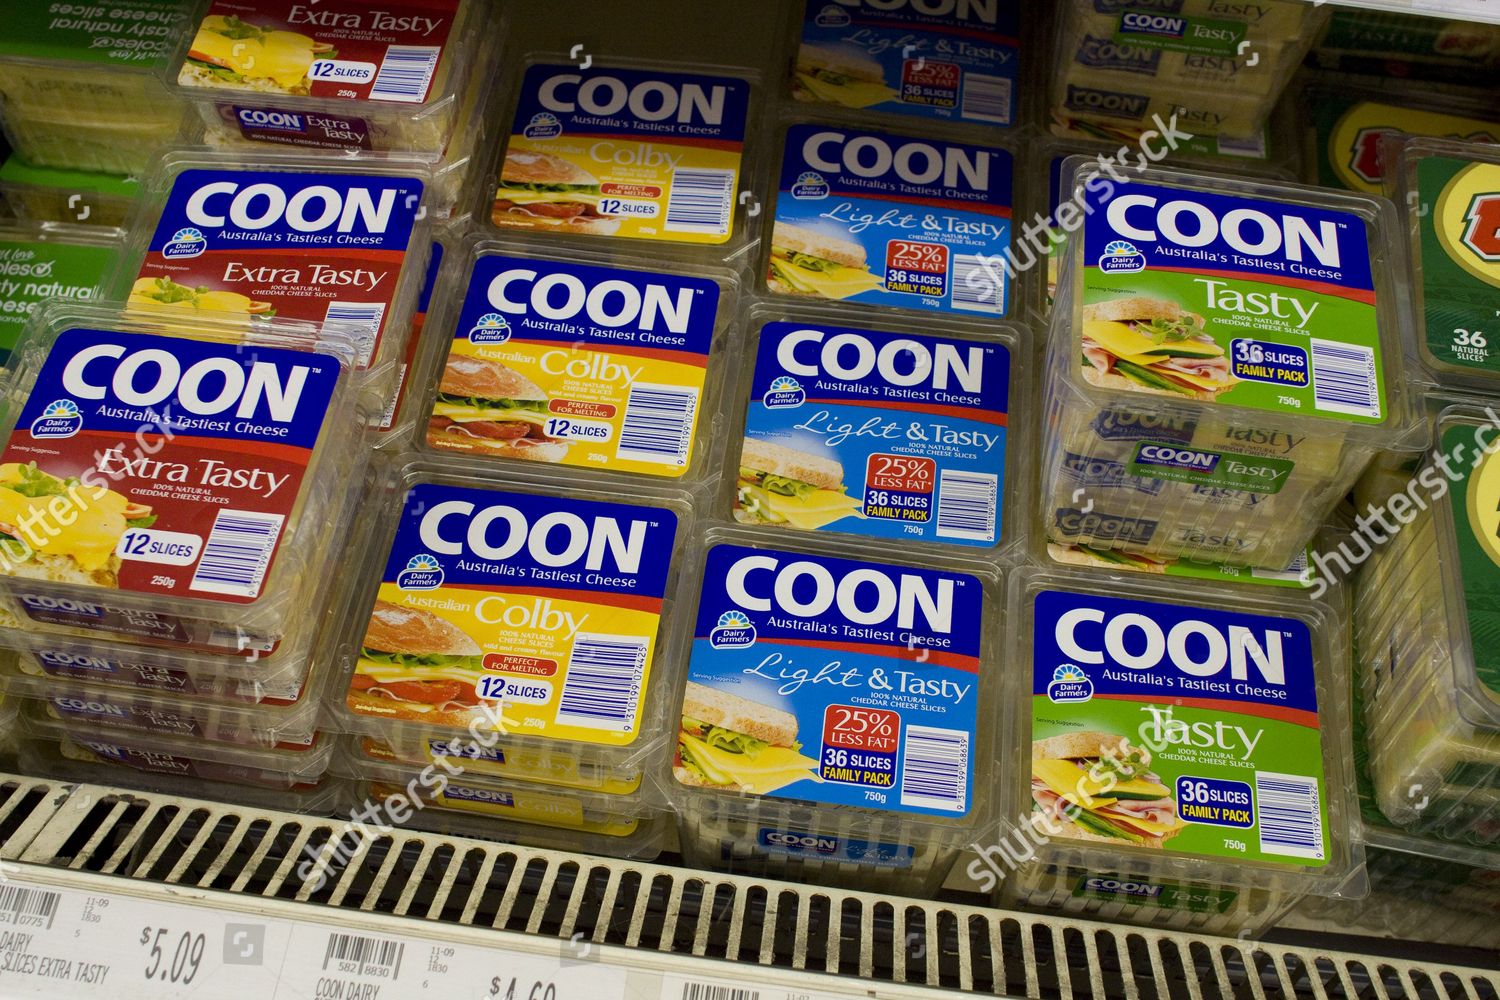 coon-branded-cheese-under-attack-in-australia-shutterstock-editorial-813815a.jpg